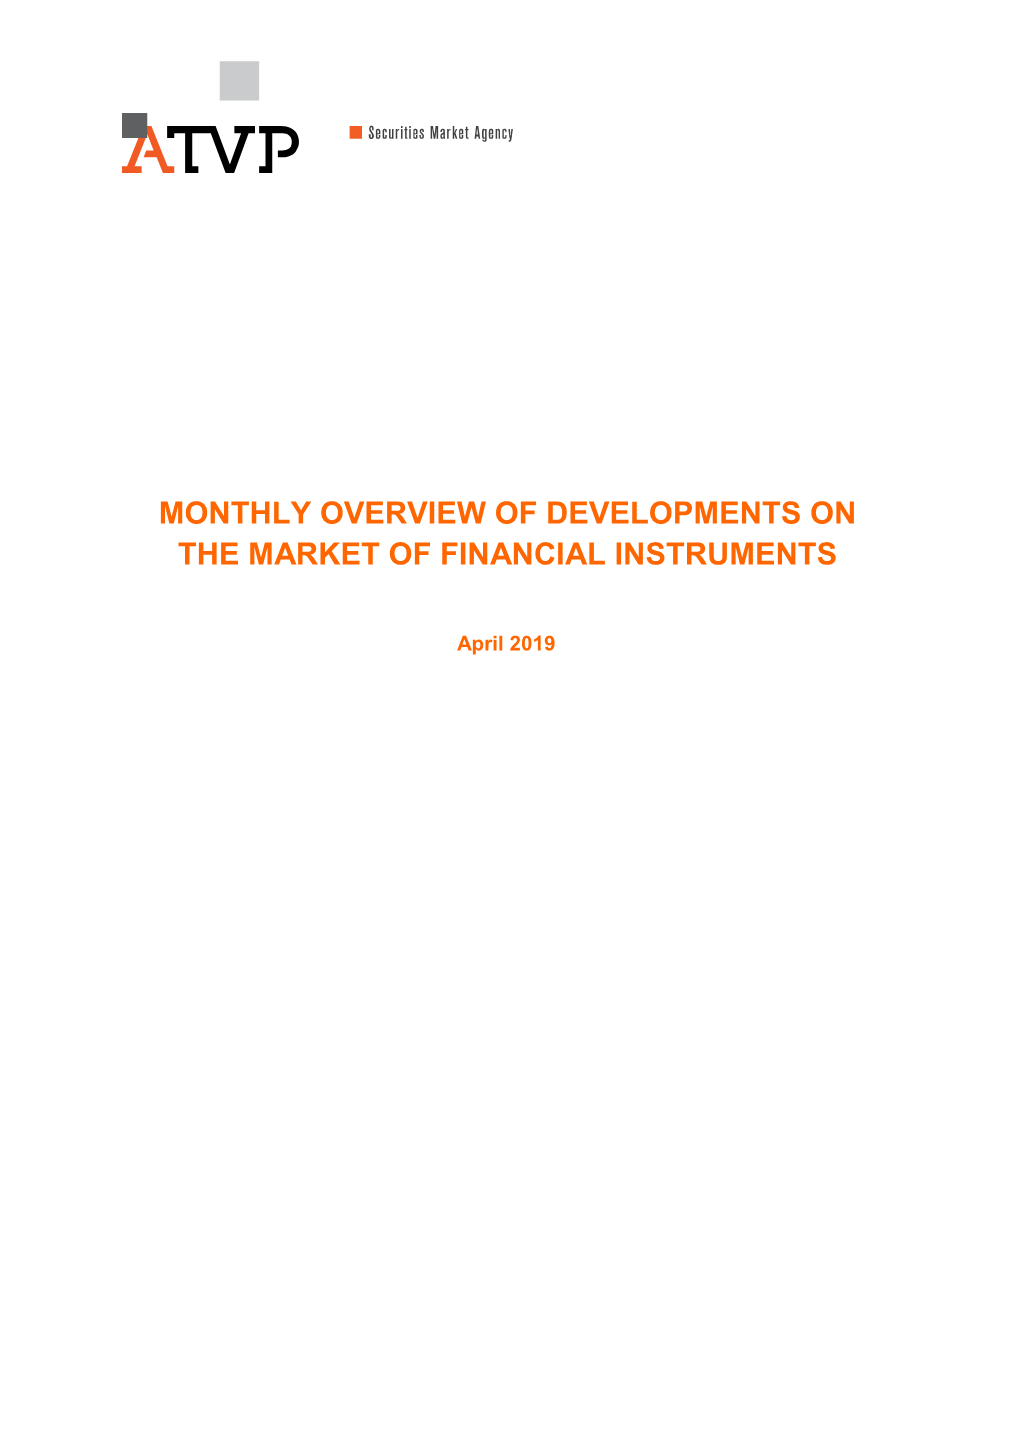 Monthly Overview of Developments on the Market of Financial Instruments